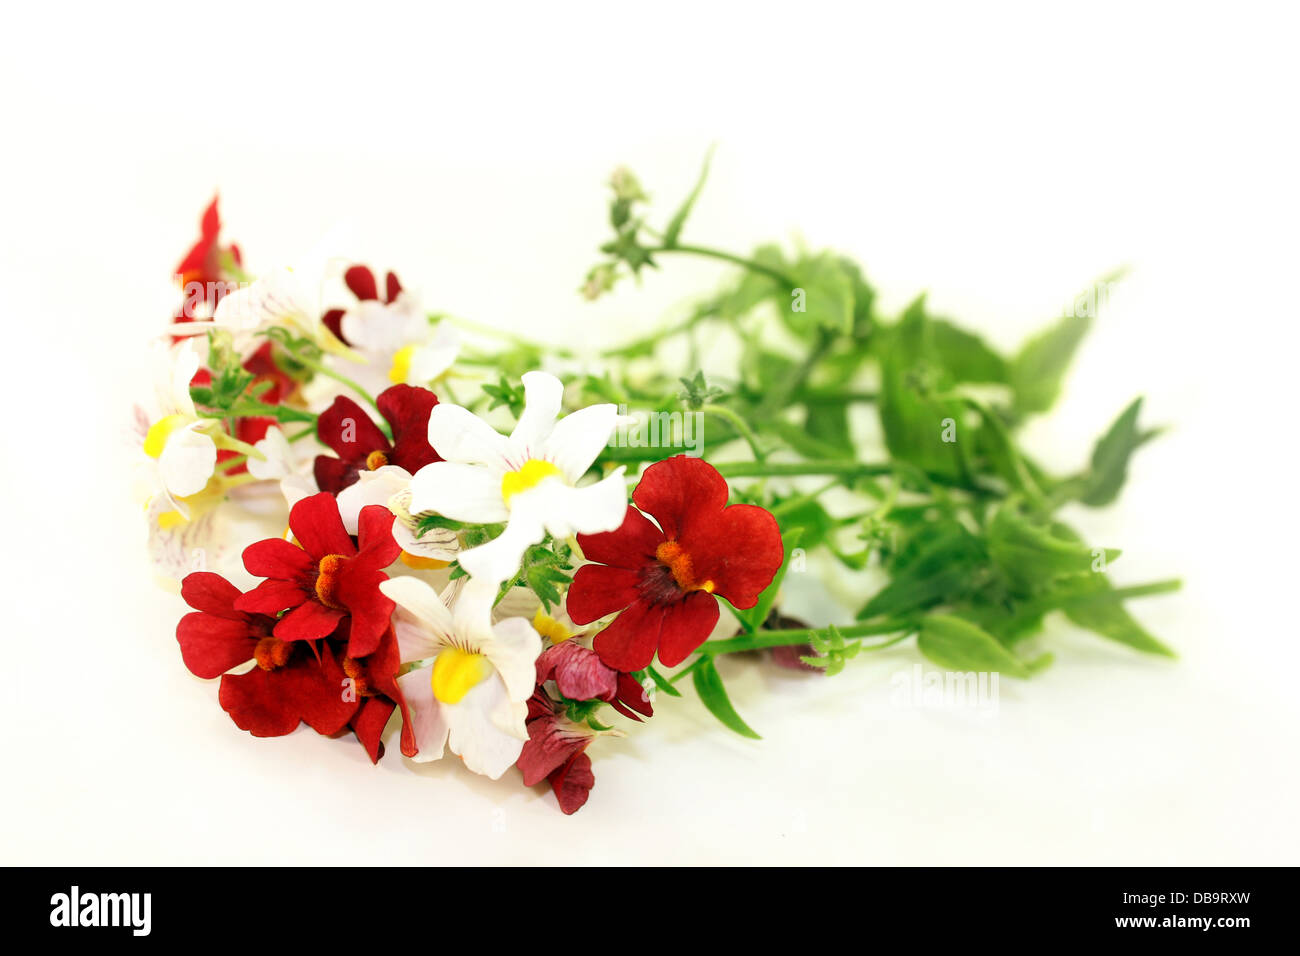 nemesia flower and leaves against a white background Stock Photo